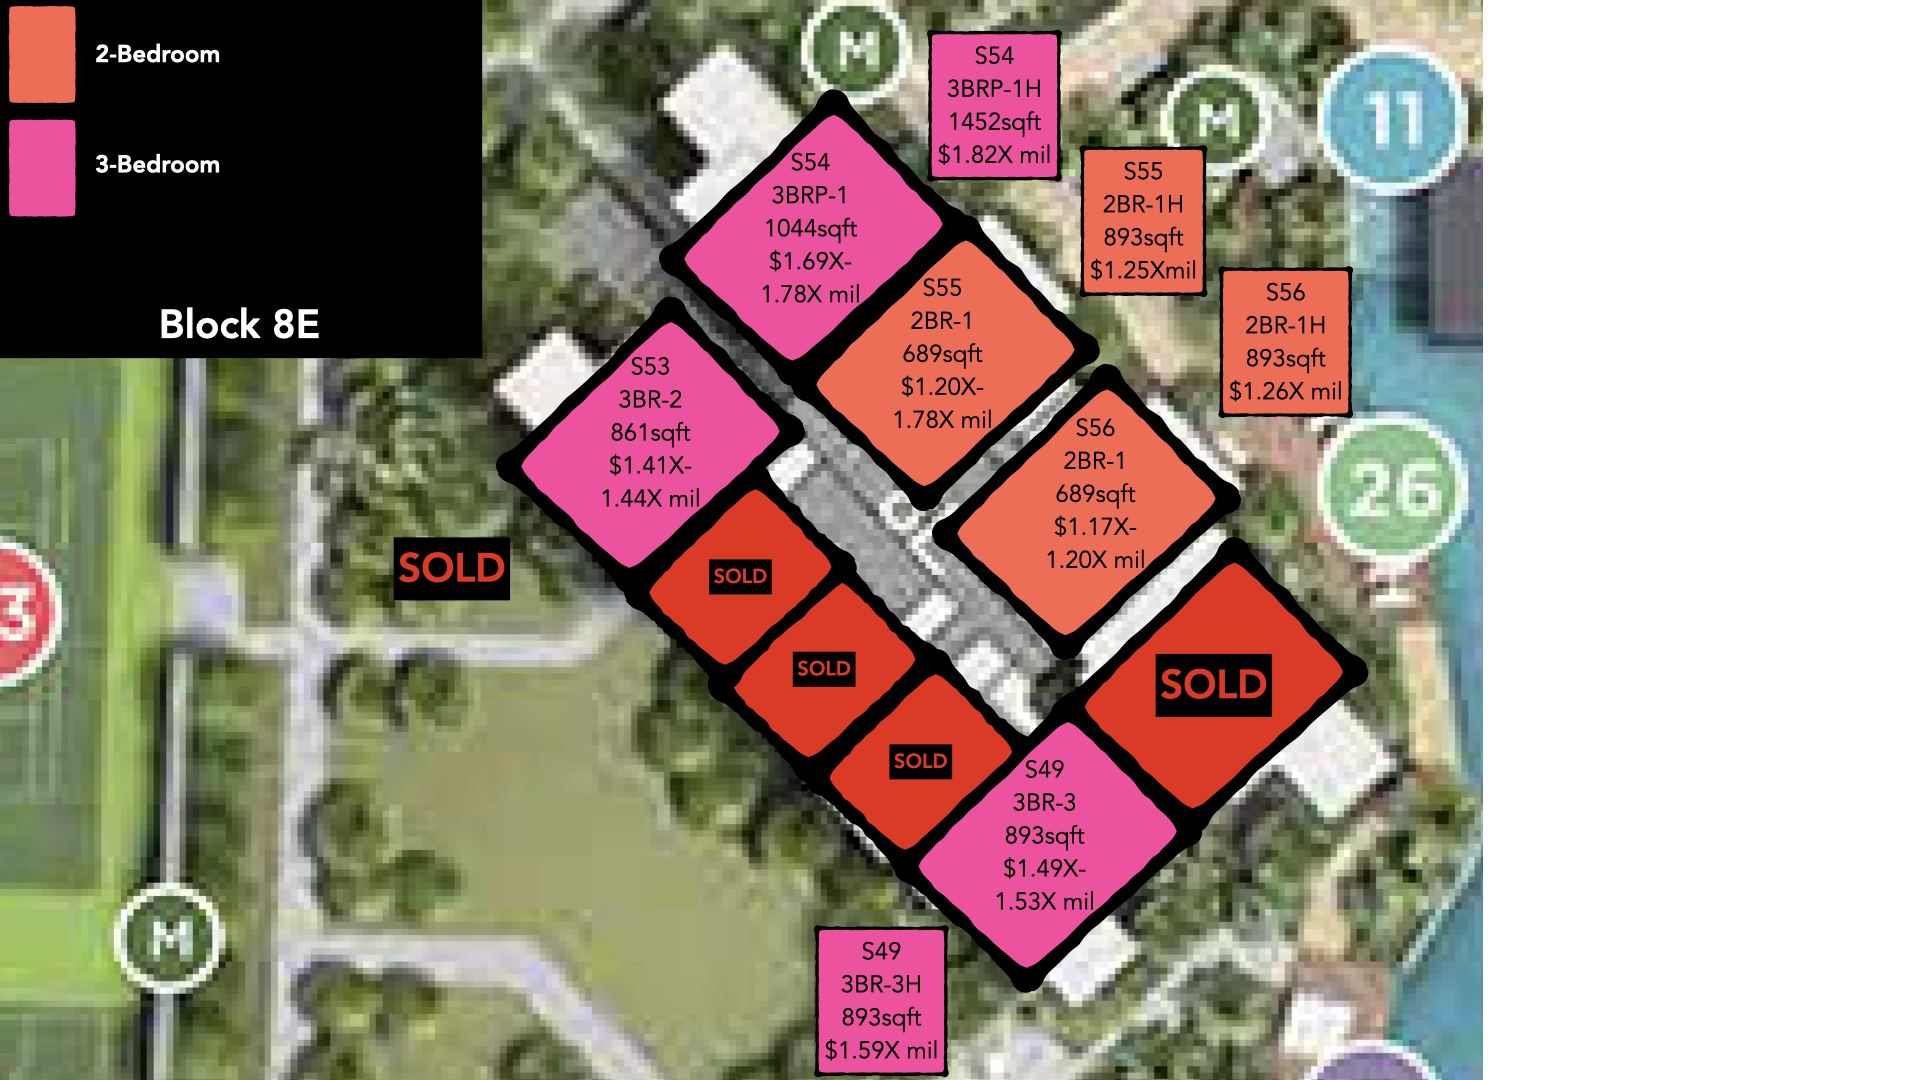 Parc Clematis Price Distribution Site Plan Block 8E PropertyLimBrothers.png